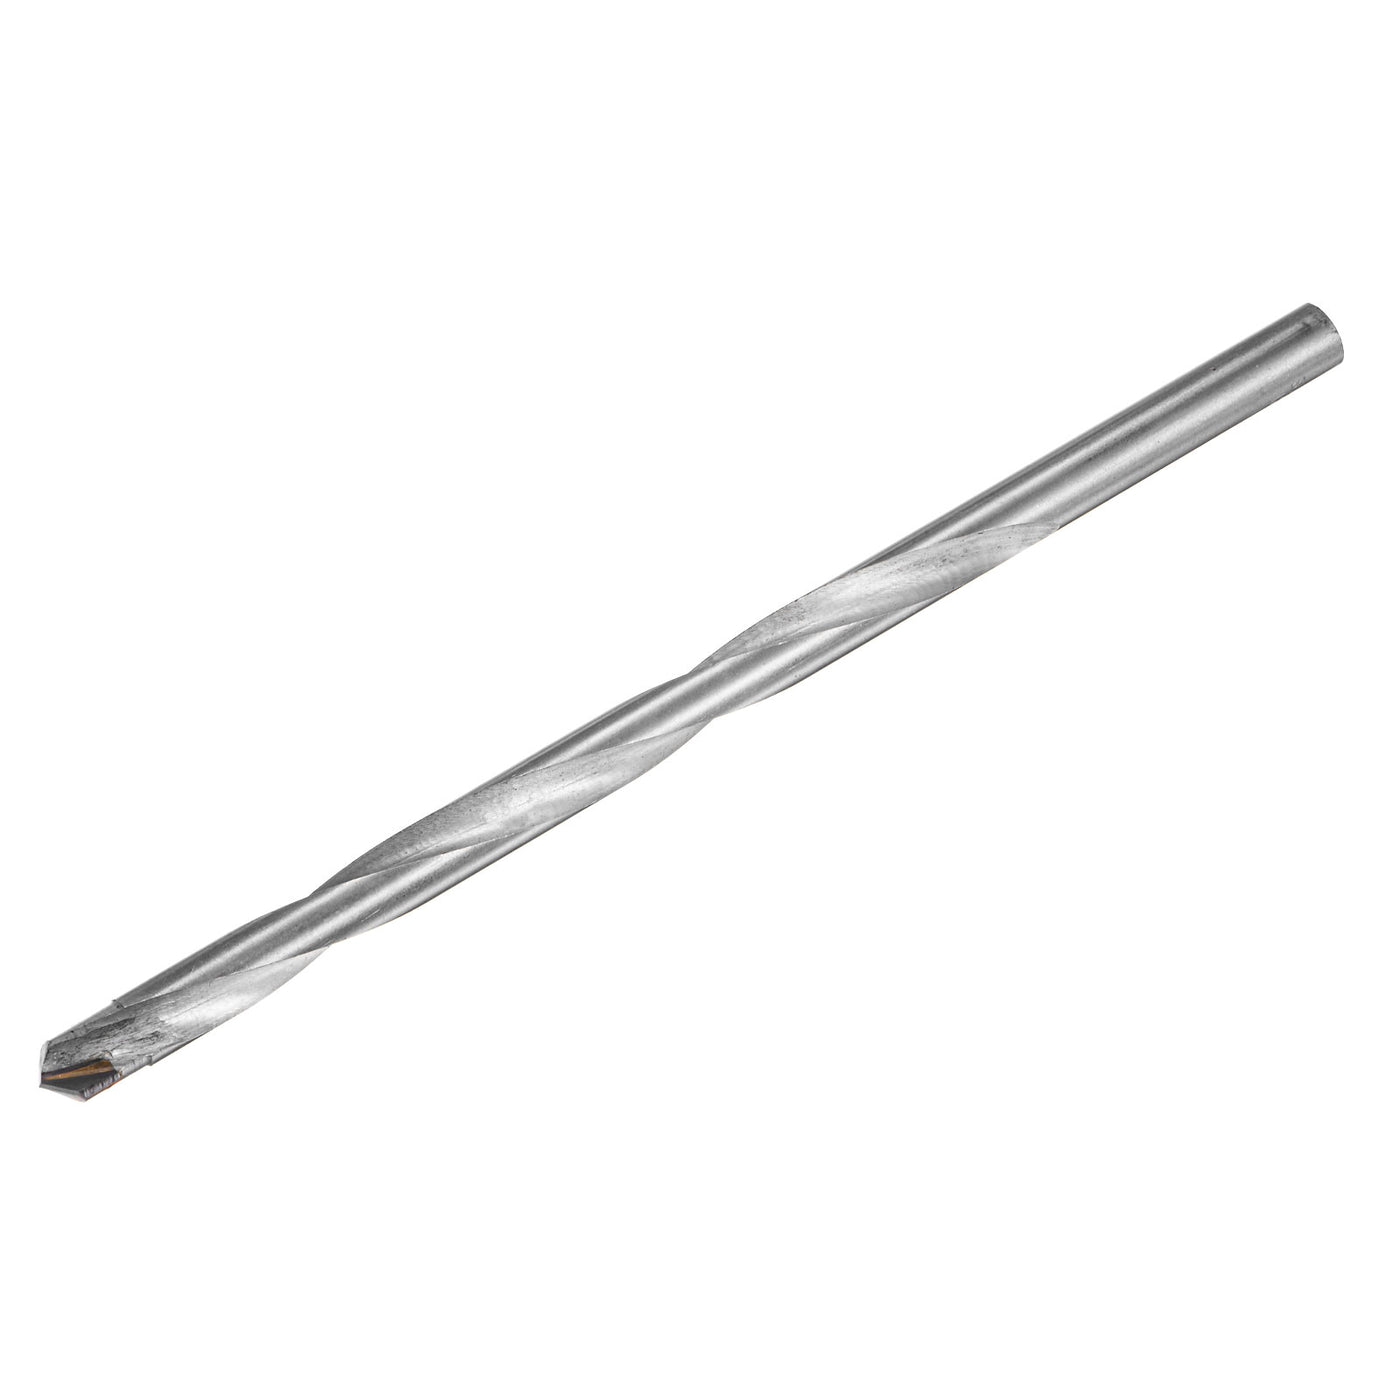 Uxcell Uxcell 15mm Cutting Dia Round Shank Cemented Carbide Twist Drill Bit, 200mm Length